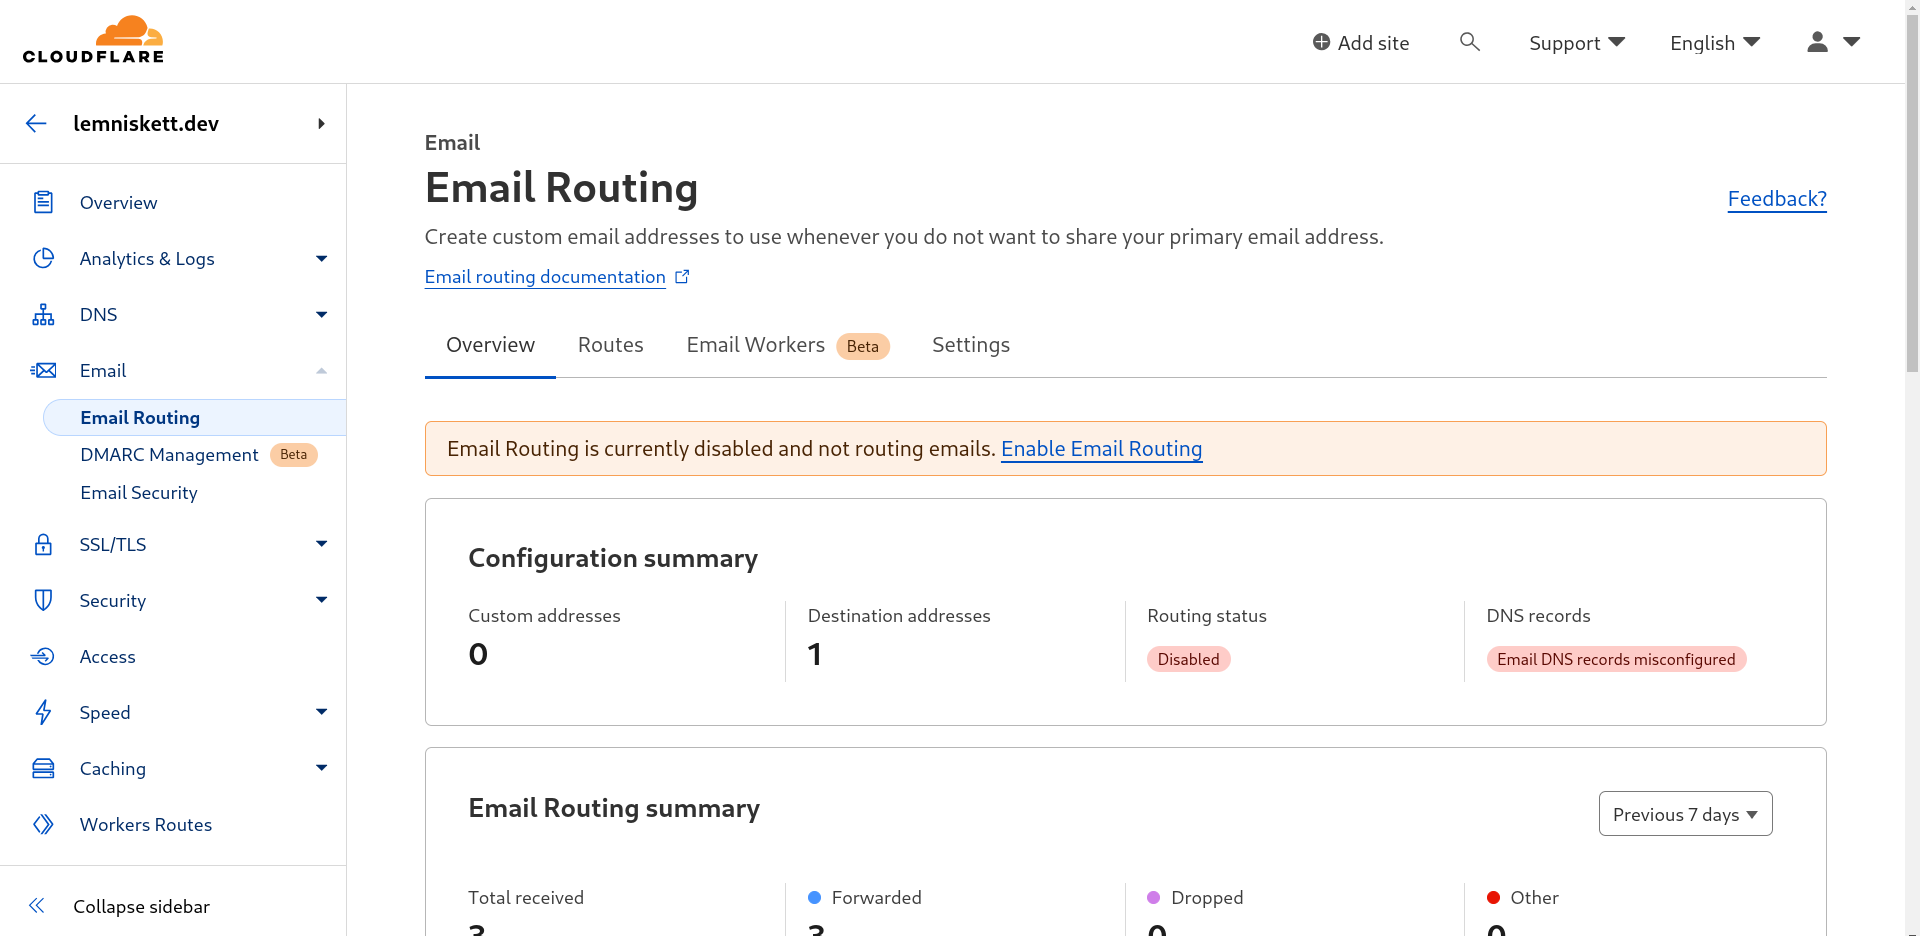 Email Routing Dashboard